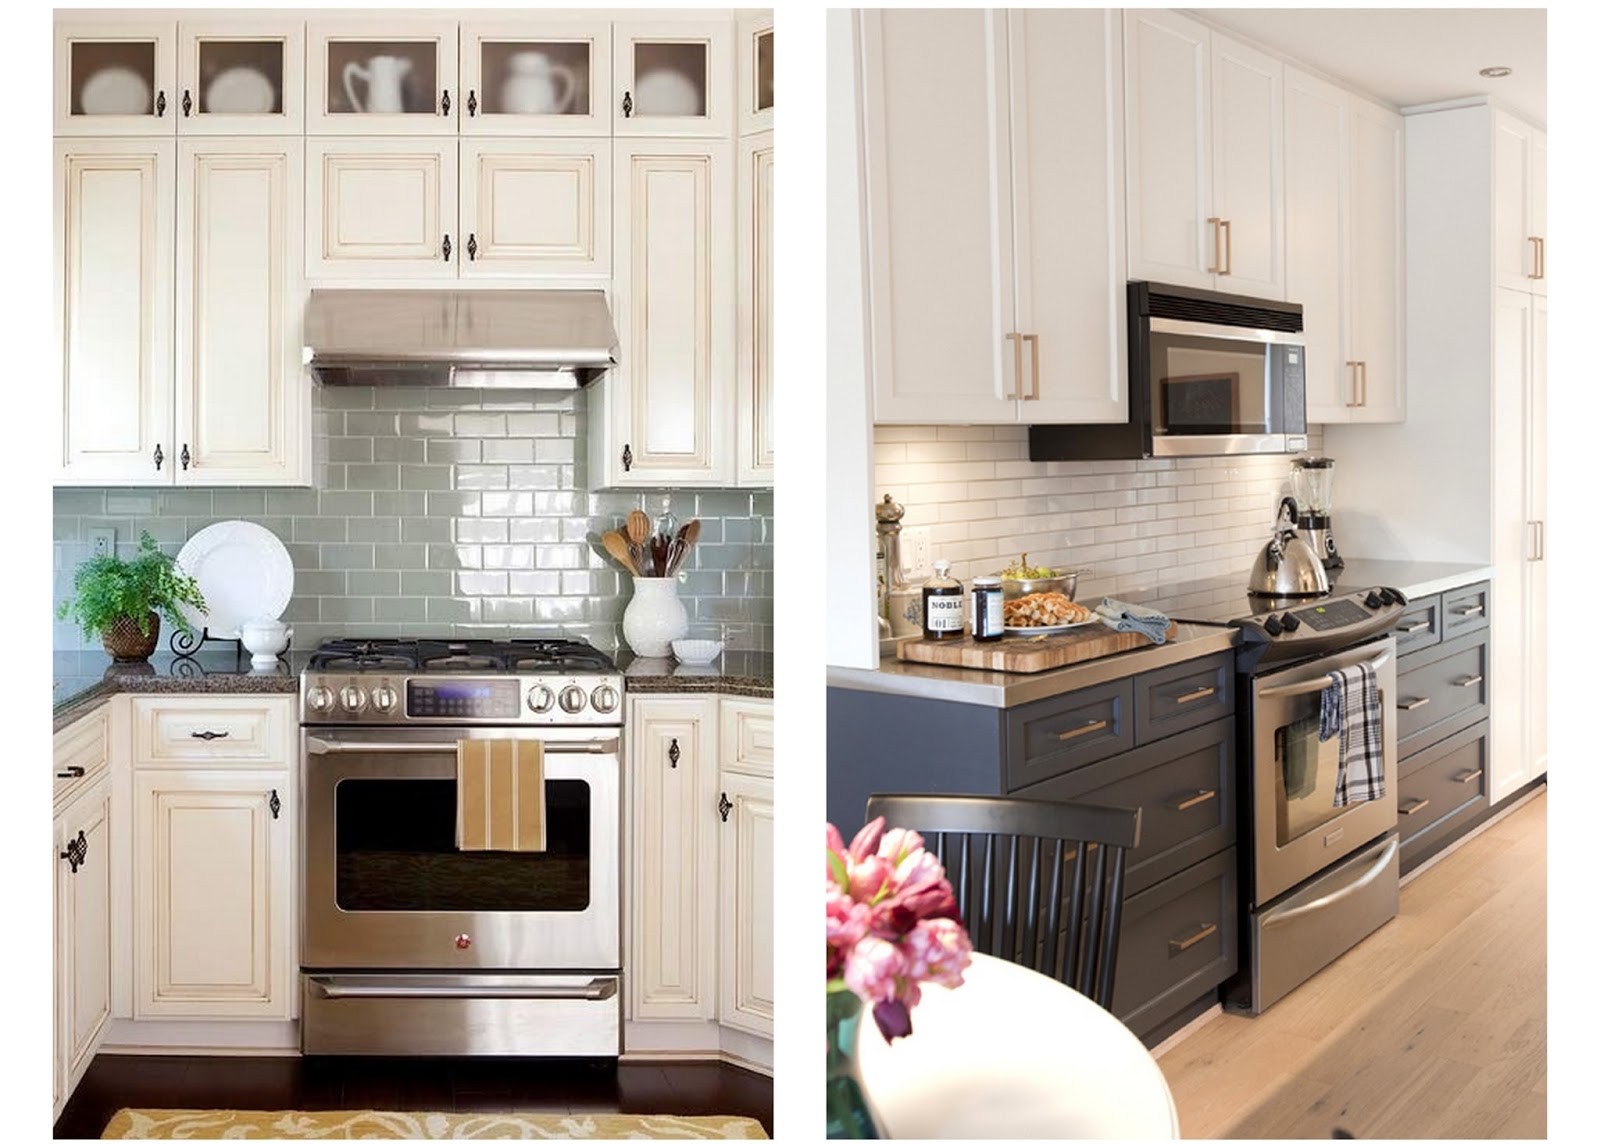 Kitchen Design Microwave Placement - Oven & Microwave Placement